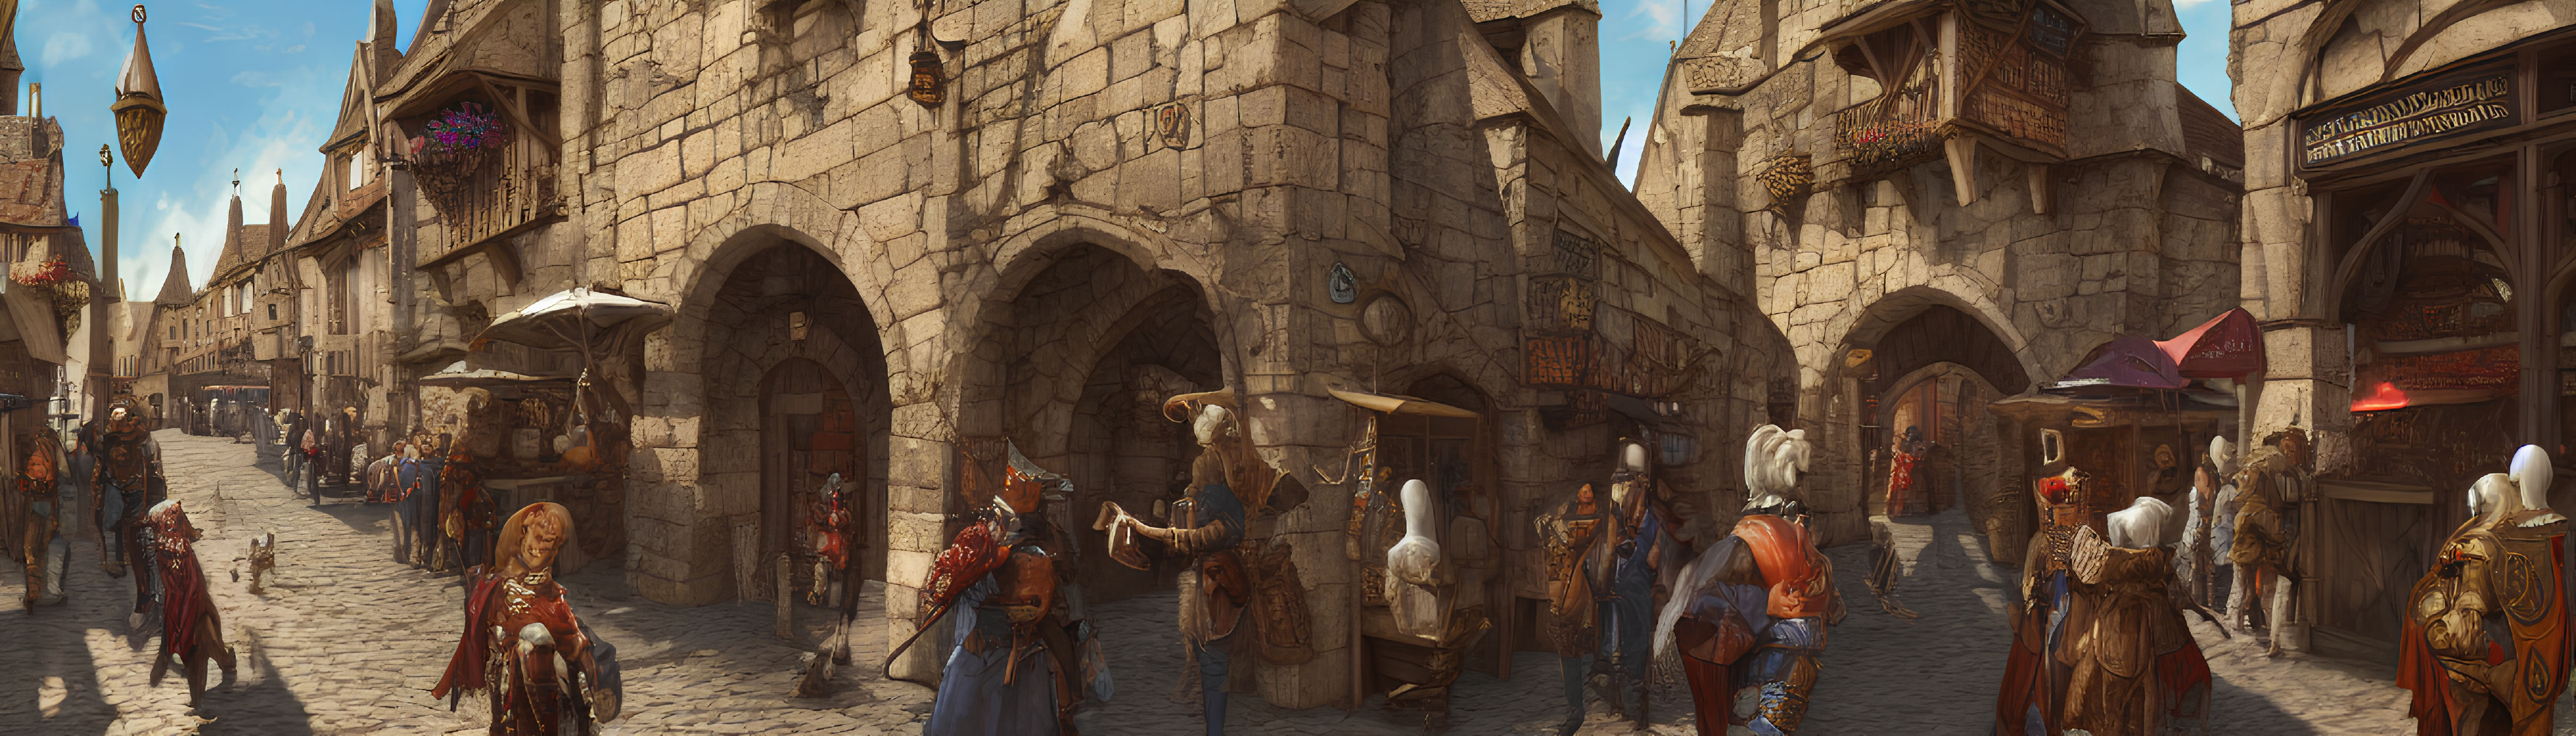 Medieval street scene with merchants, townsfolk, and knights under clear skies